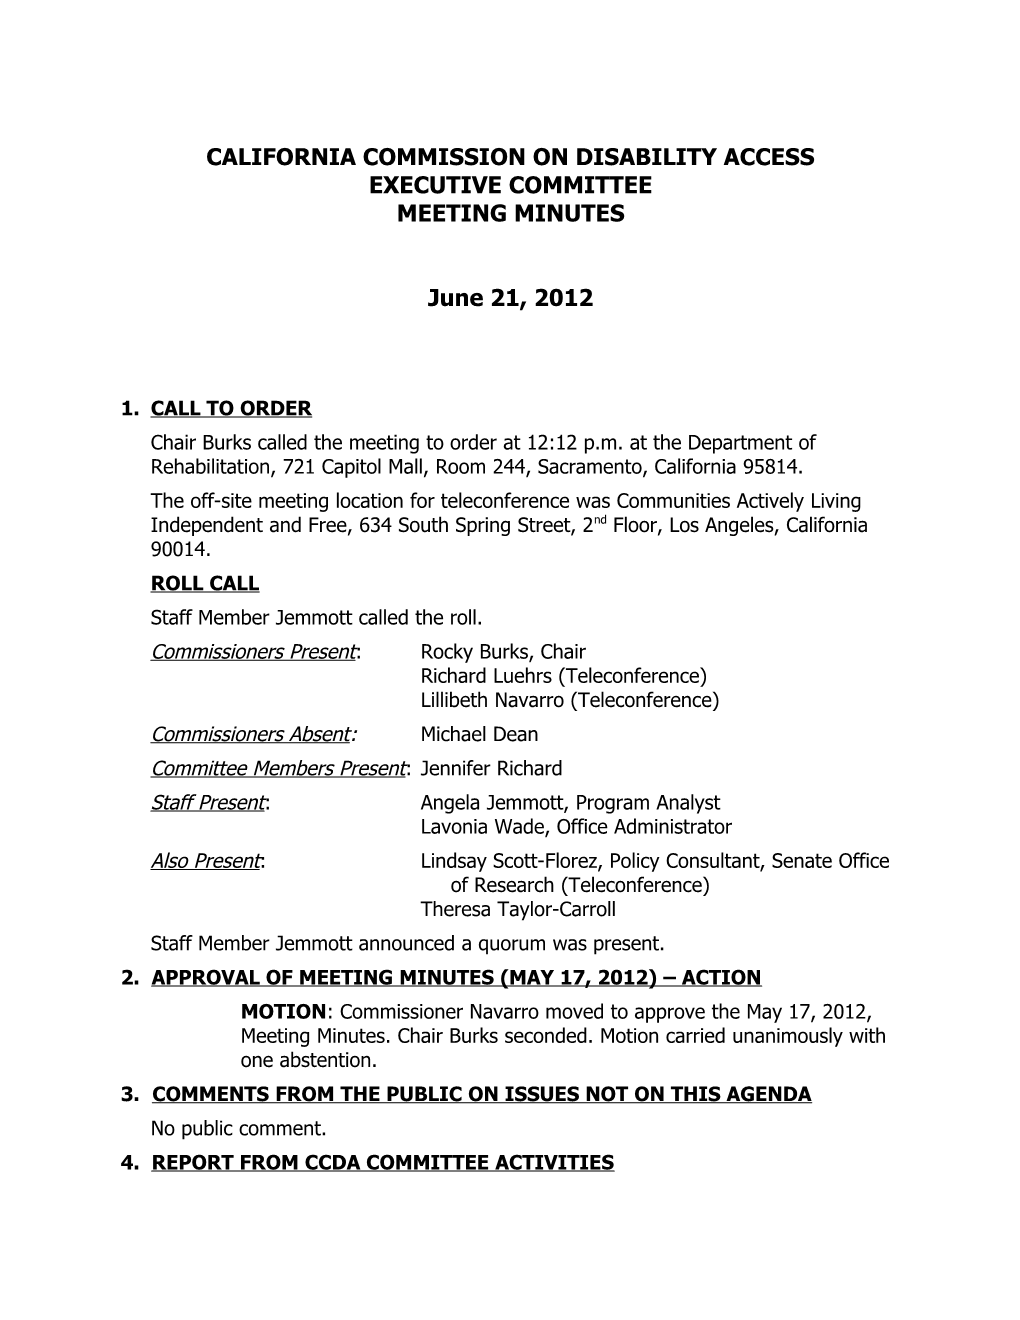 California Commission on Disability Access s4